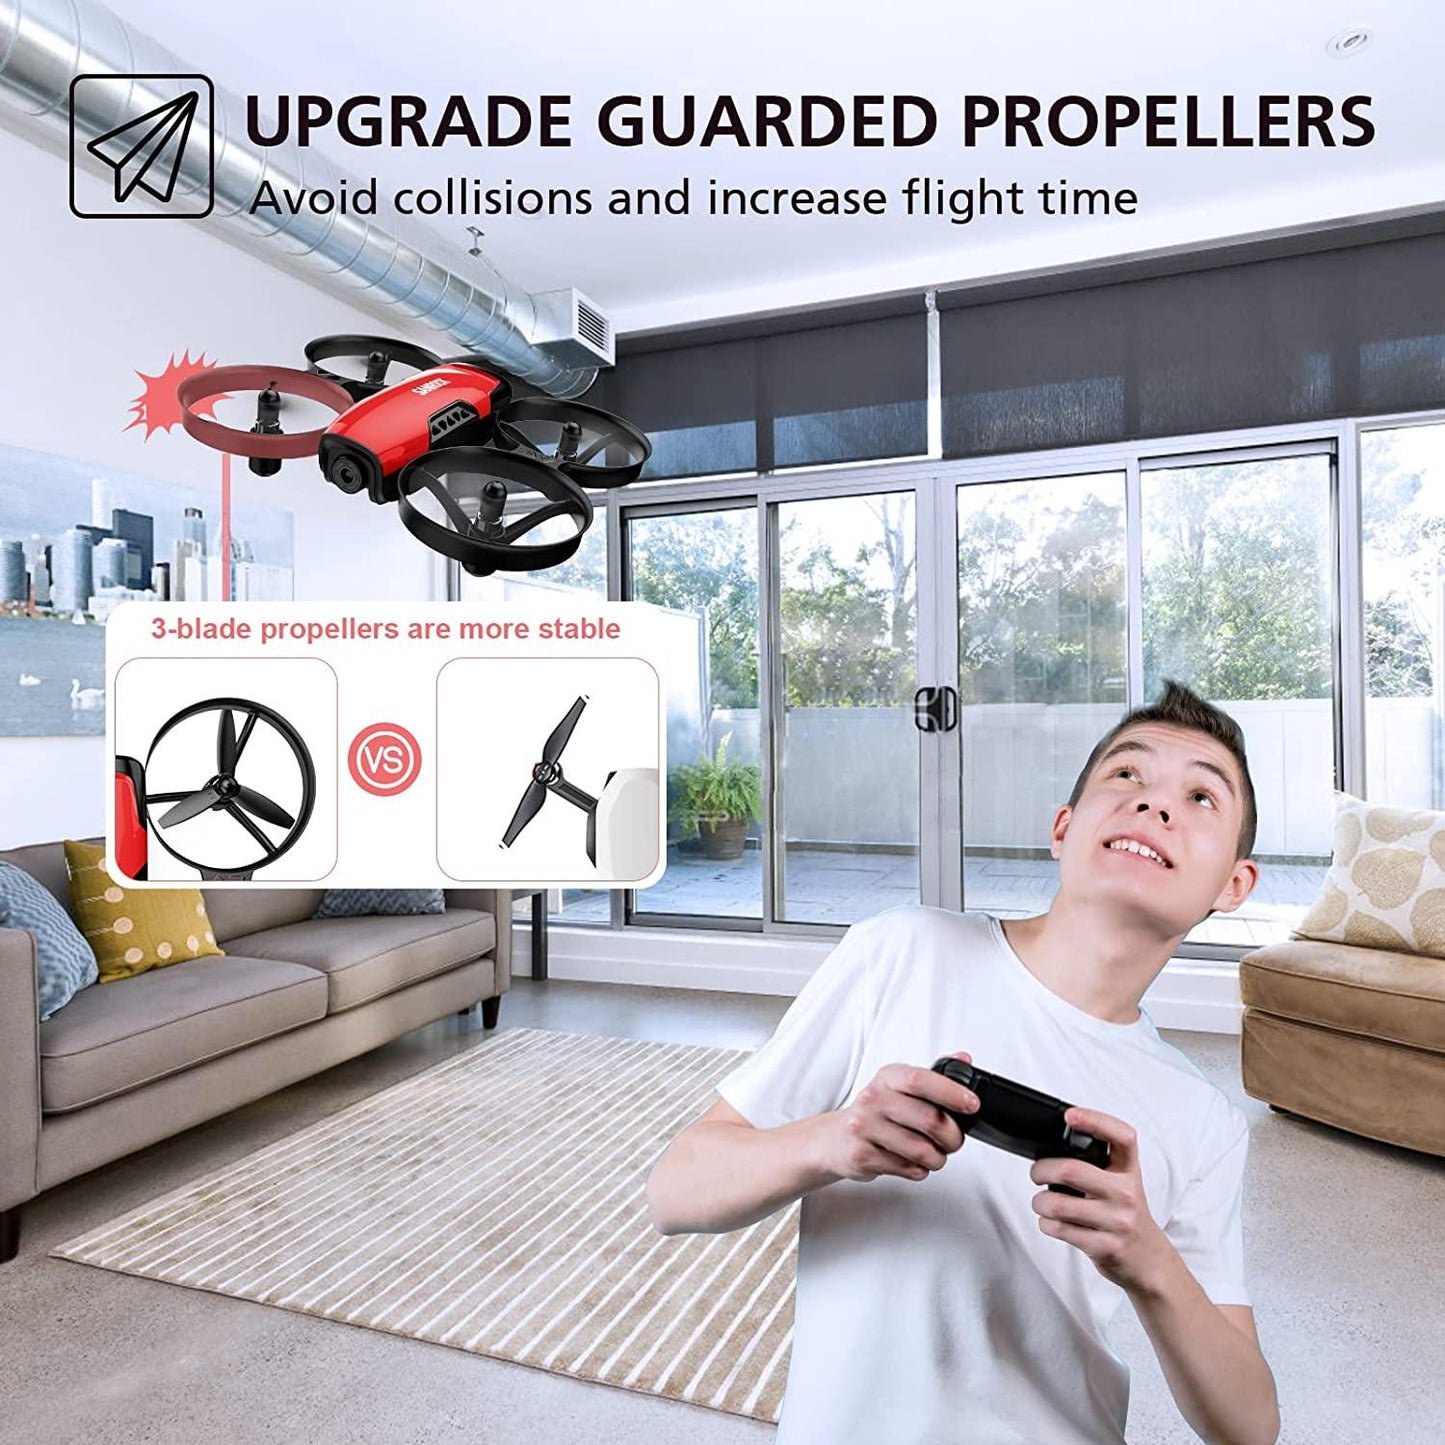 SANROCK U61W Drone - with Camera for Kids Adult Beginner 720P HD & 2 Batteries, Mini Drone Toy Gift for Boy Girl WiFi FPV RC Quadcopter, Waypoints Fly, Headless Mode, Altitude Hold, Emergency Stop - RCDrone